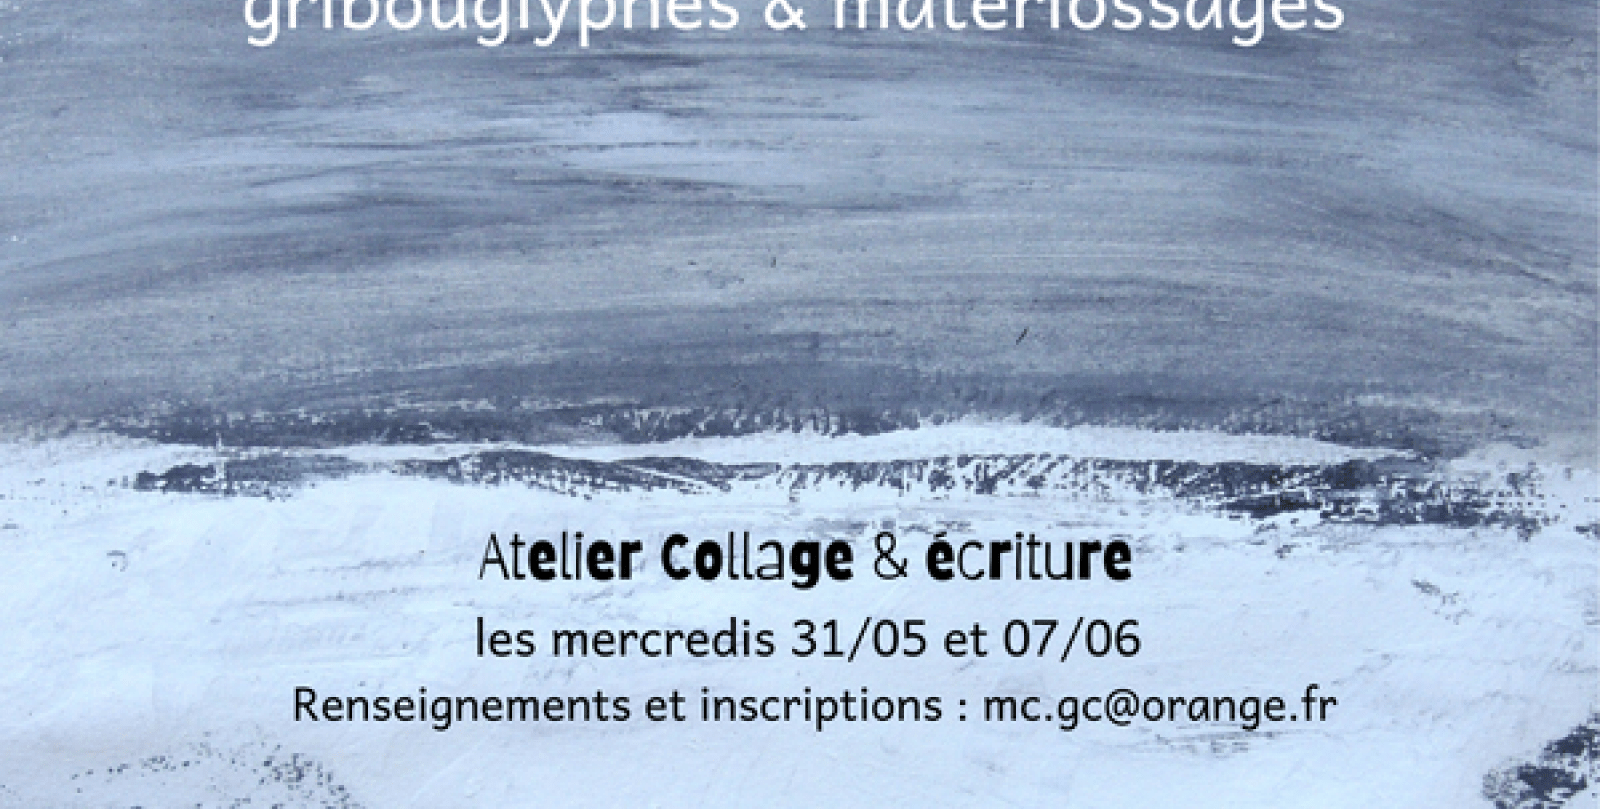 ©Affiche expo Limogne Cathy Garcia Canales